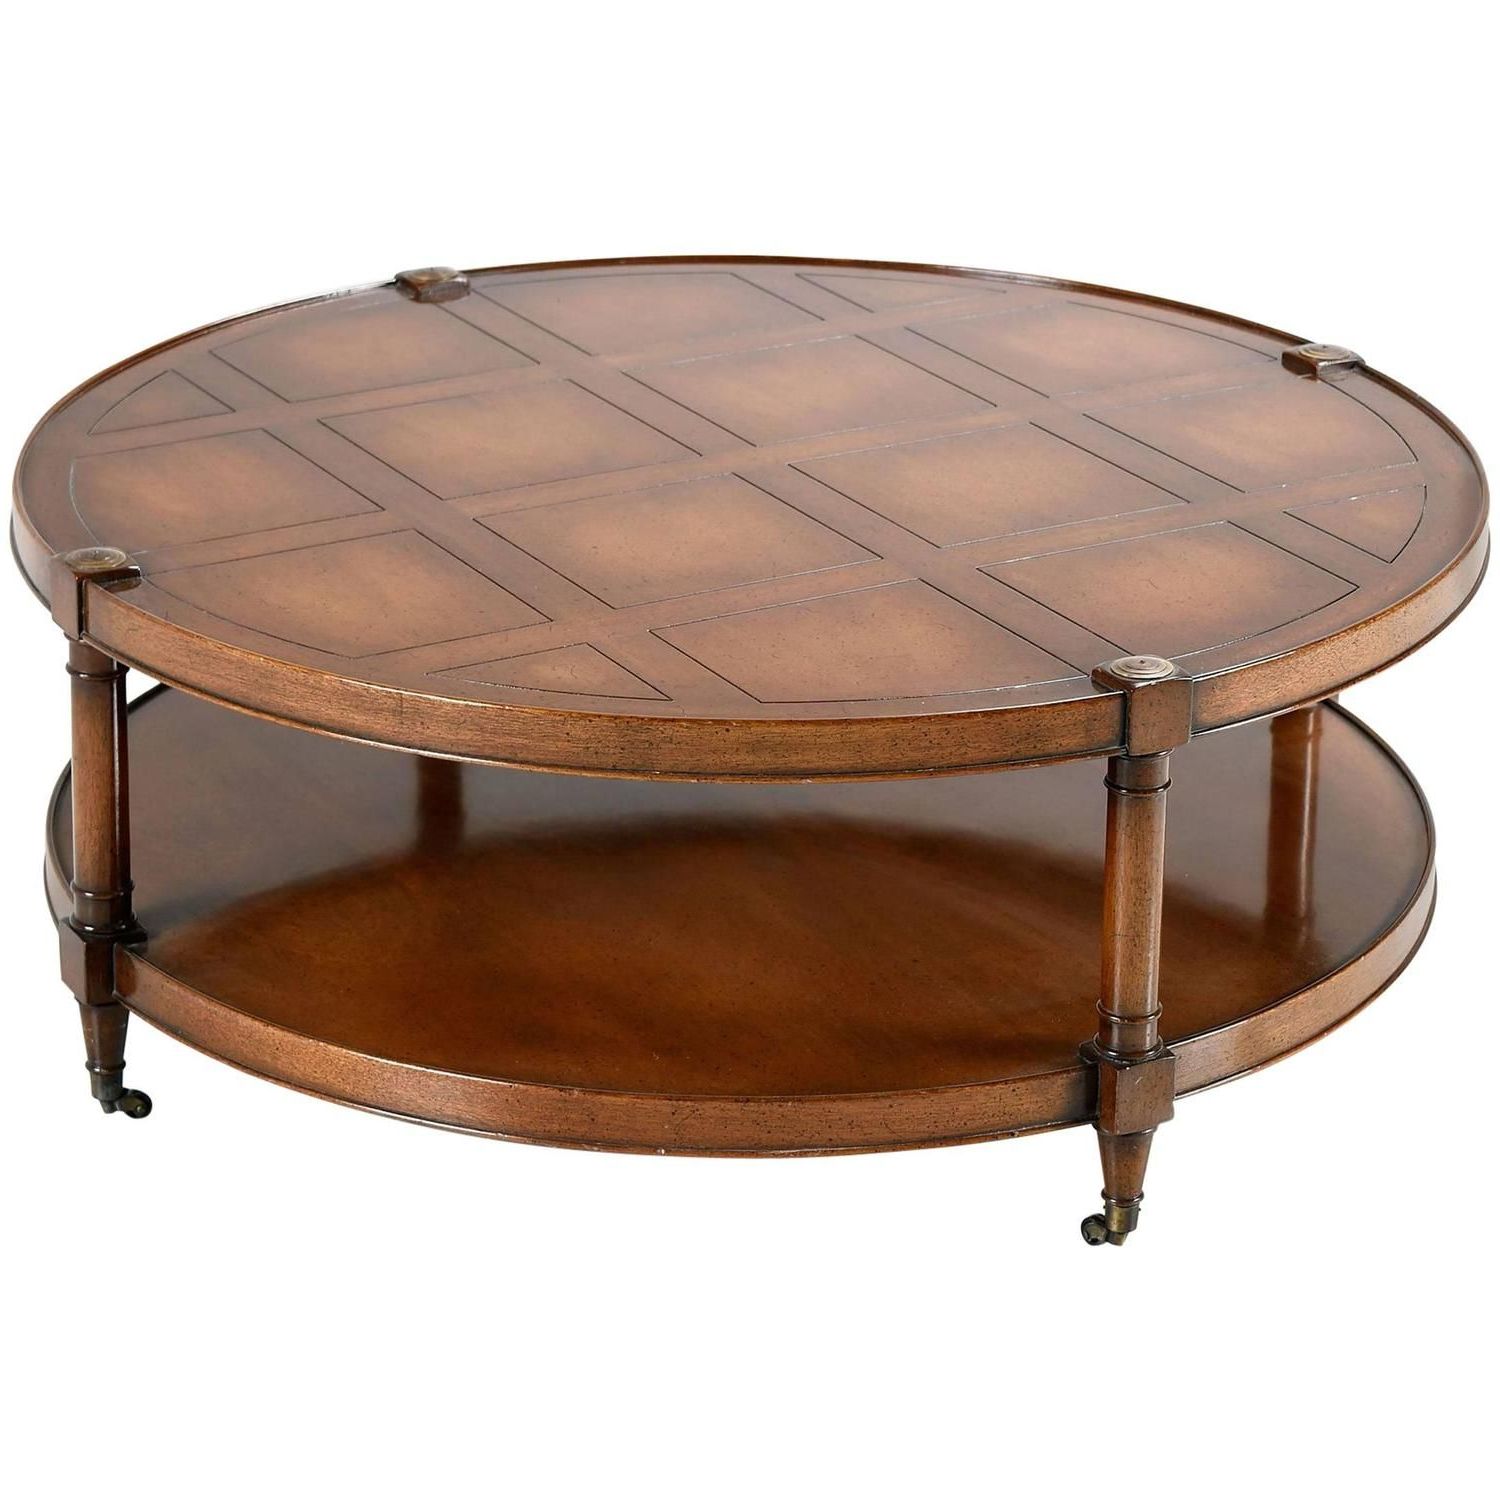 Most Recent American Heritage Round Coffee Tables With Regard To Heritage Mahogany Round Coffee Table On Casters (Photo 12 of 15)